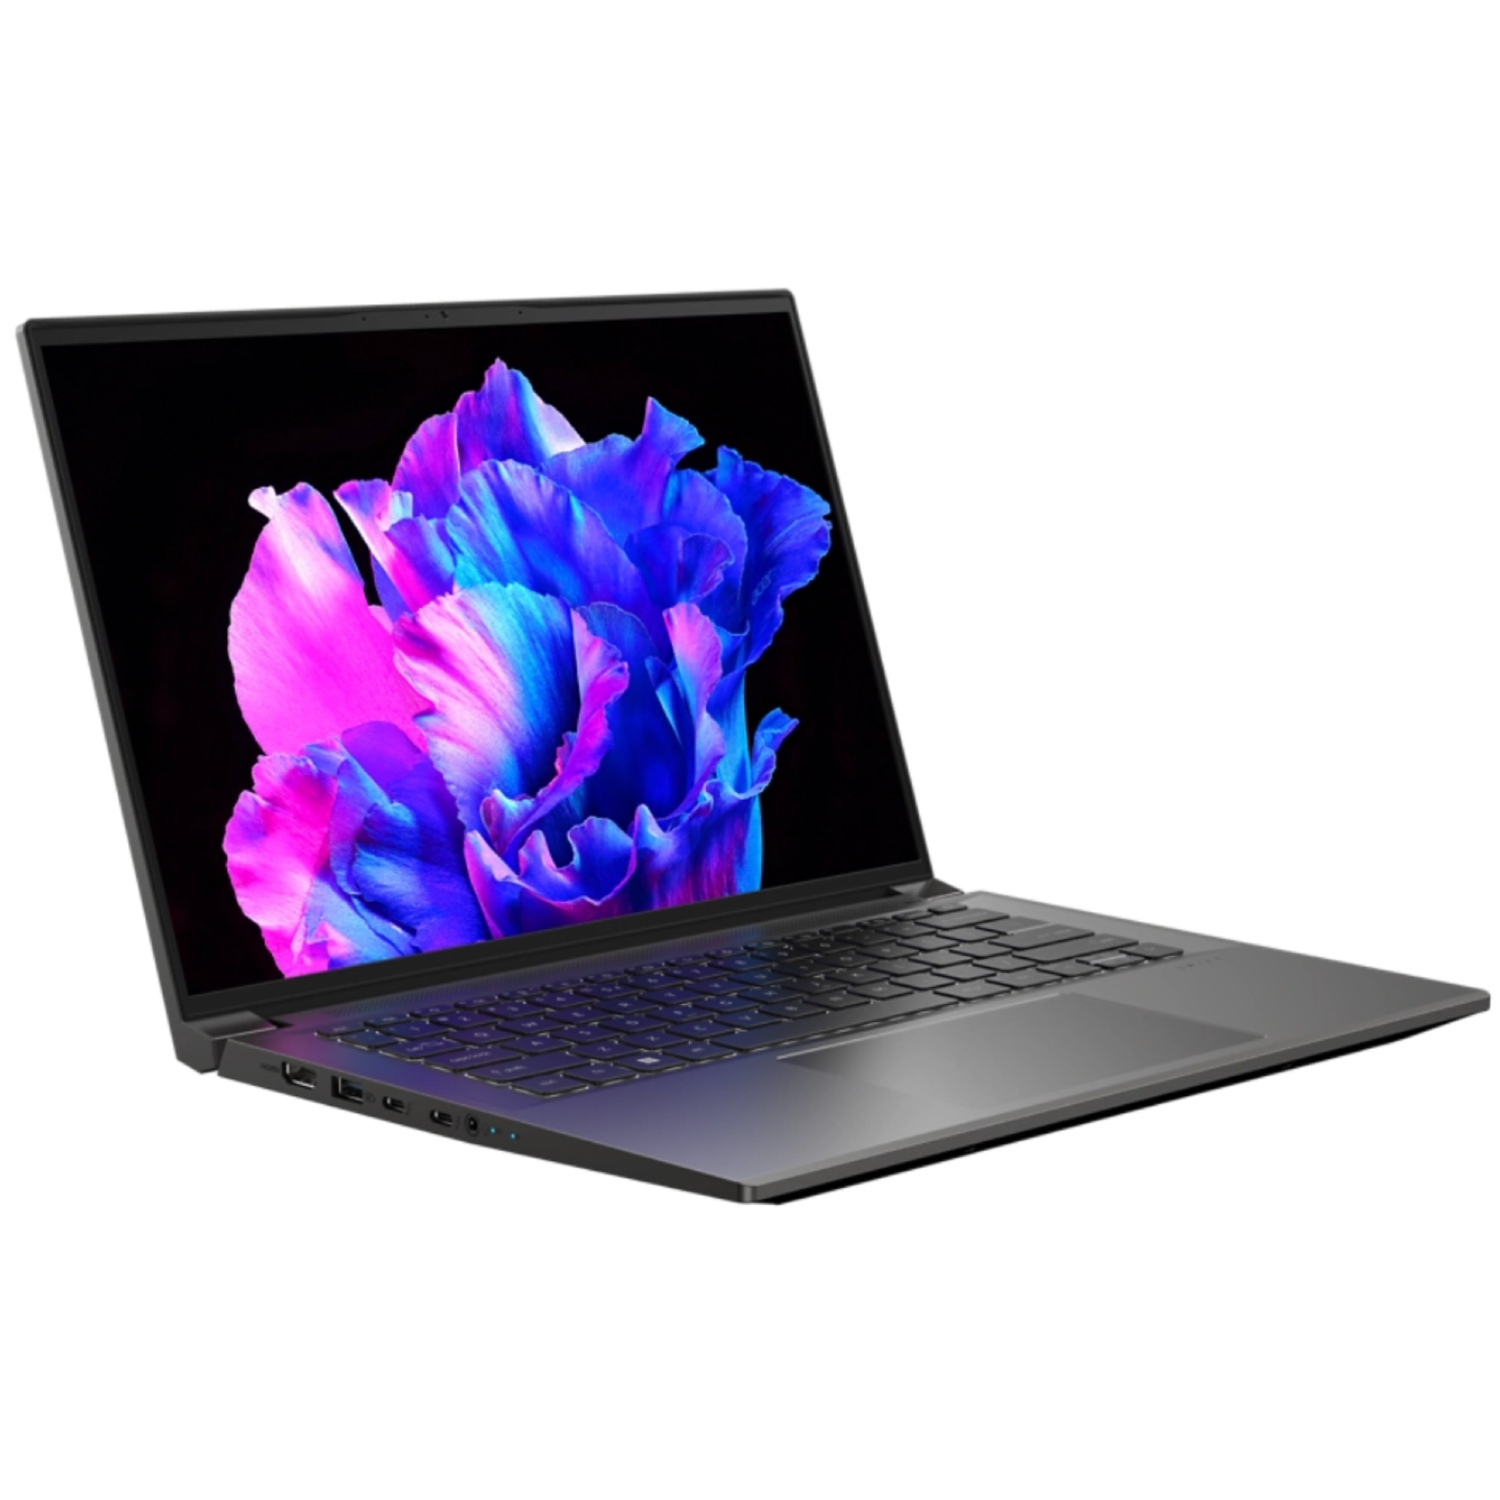 Product render of the Acer Swift X 14 (SFX14-71G).